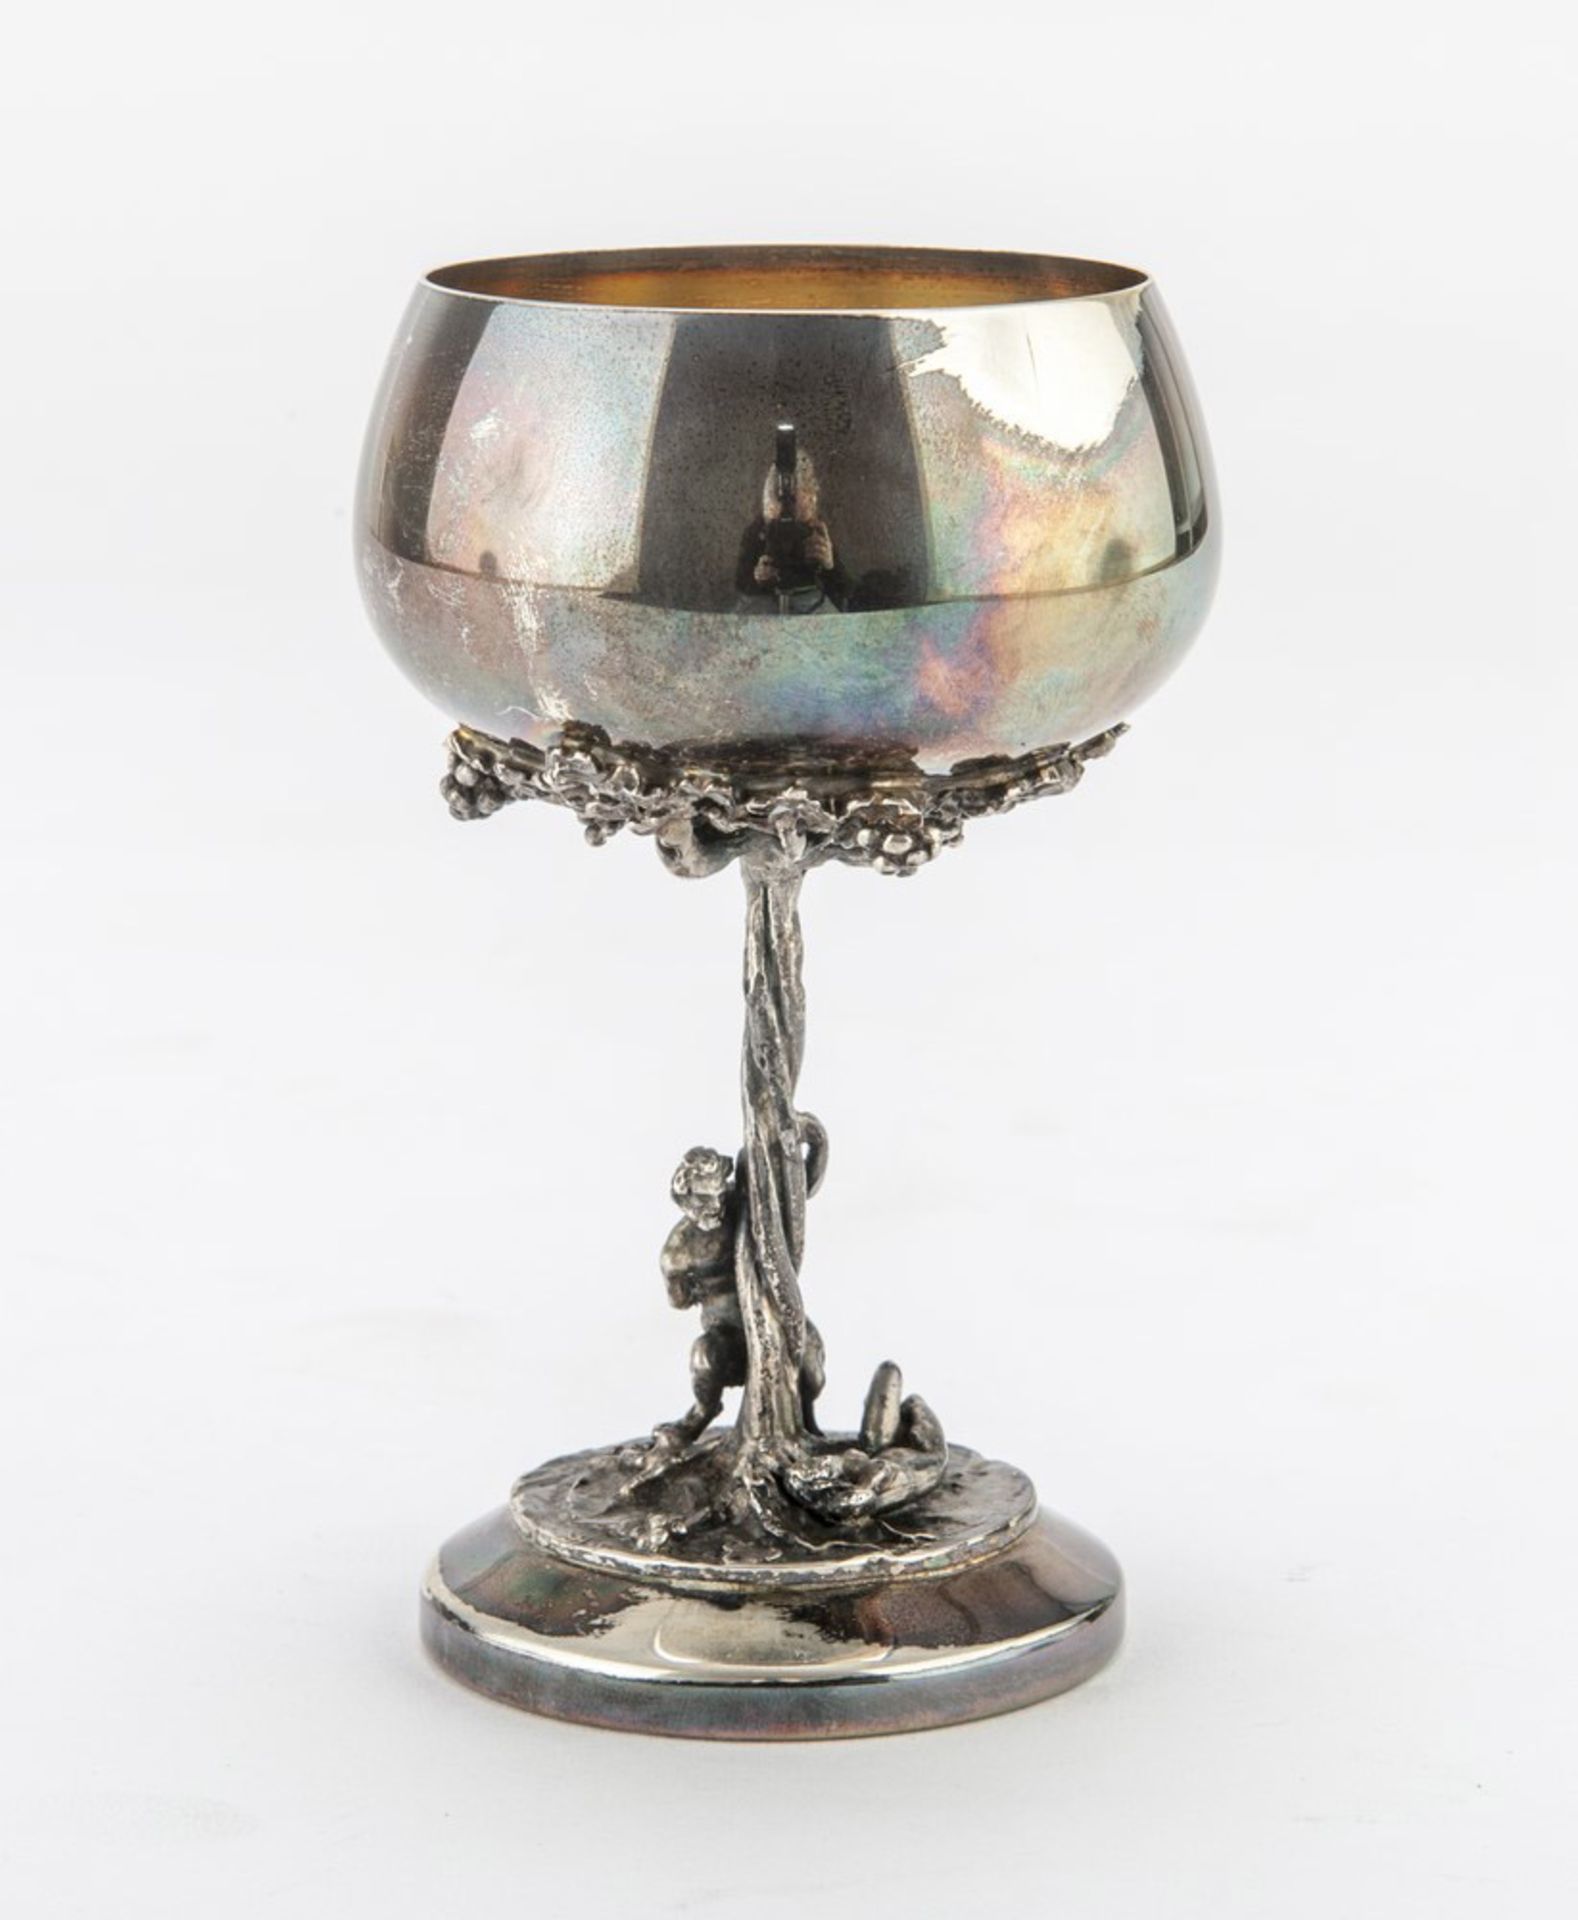 SMALL SILVER CUP, PUNCH ALEXANDRIA POST 1968 inside gilded, stem to tree with figure of Faun.